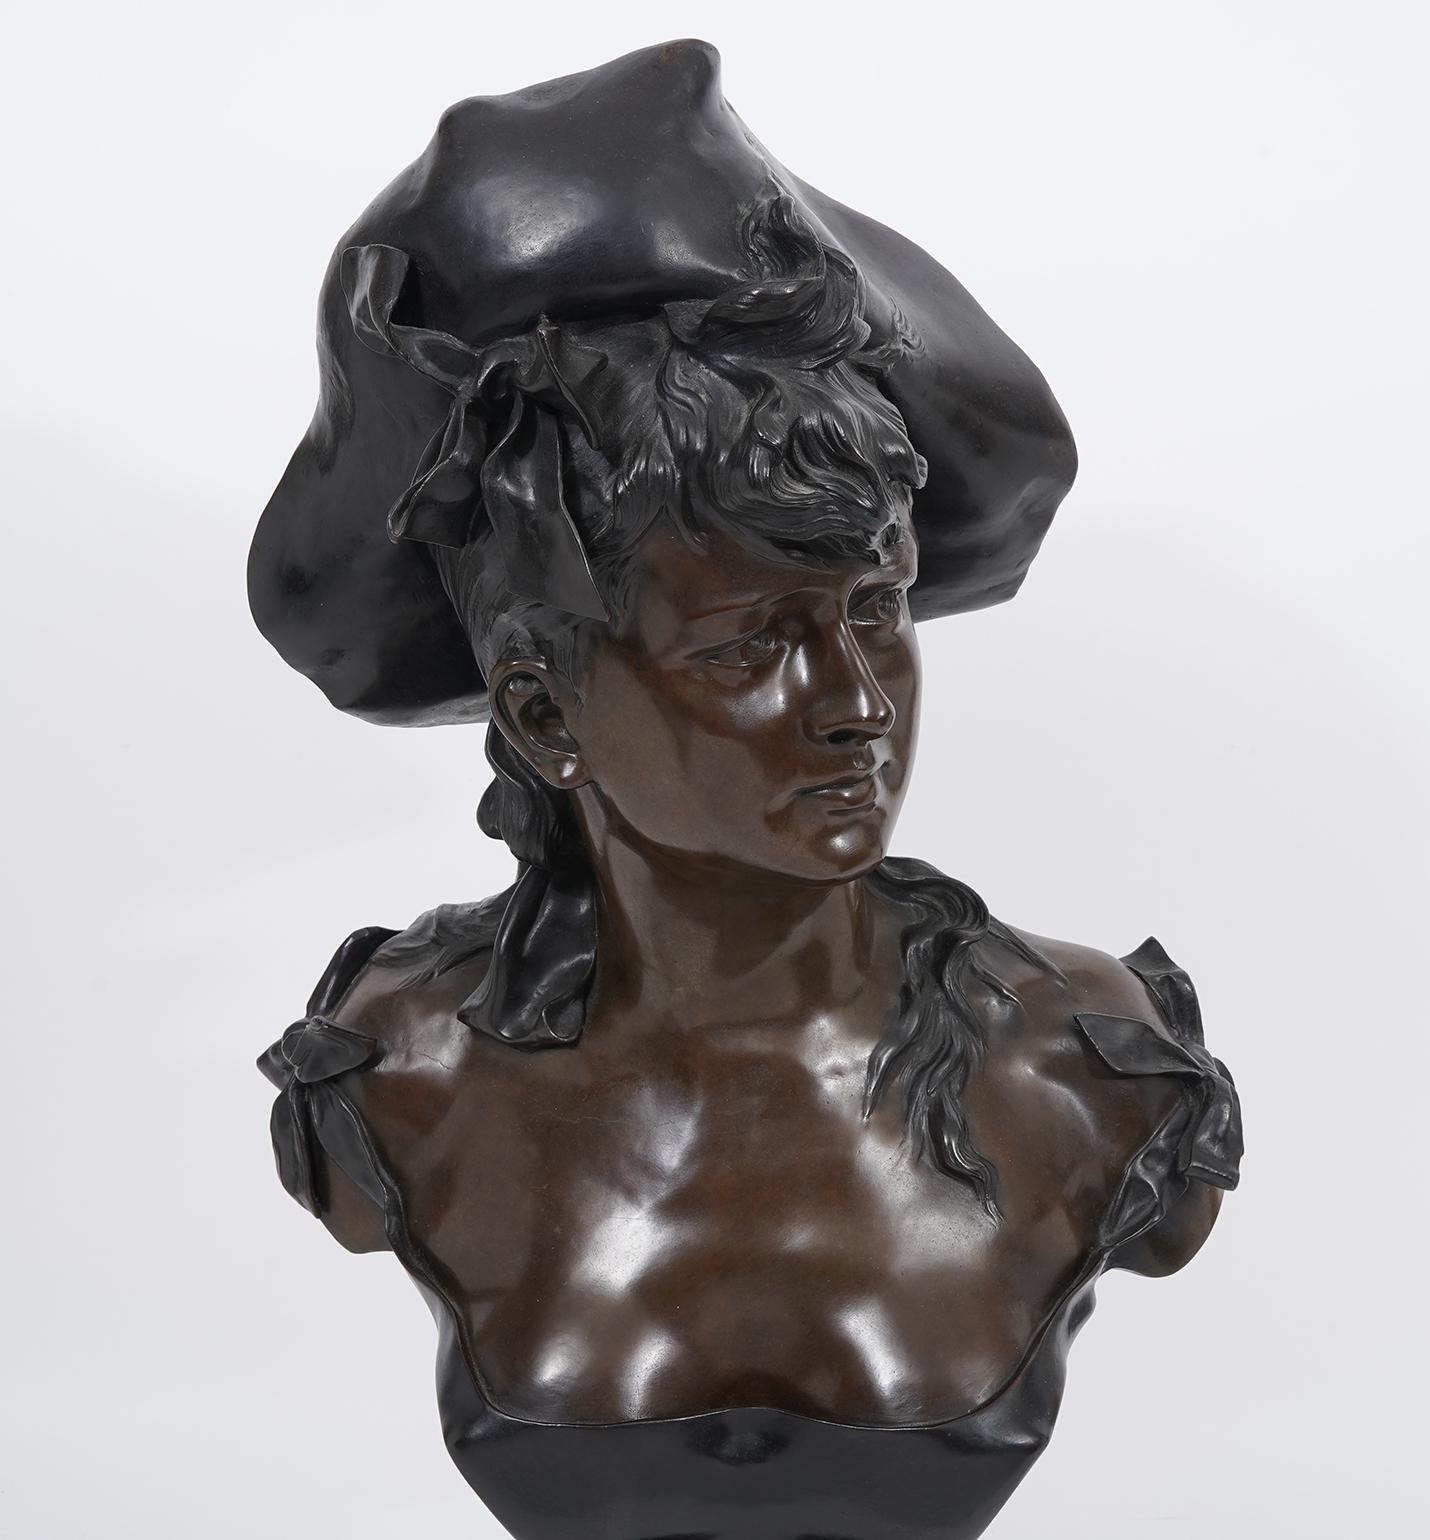 Standing 29 inches tall this bust of a young woman sporting a Louis IV era costume by French sculptor Alfonse Henri Nelson (1854-1909) is a fine example of the new Art Nouveau style modeled with flowing forms, soft lines and a combination of two